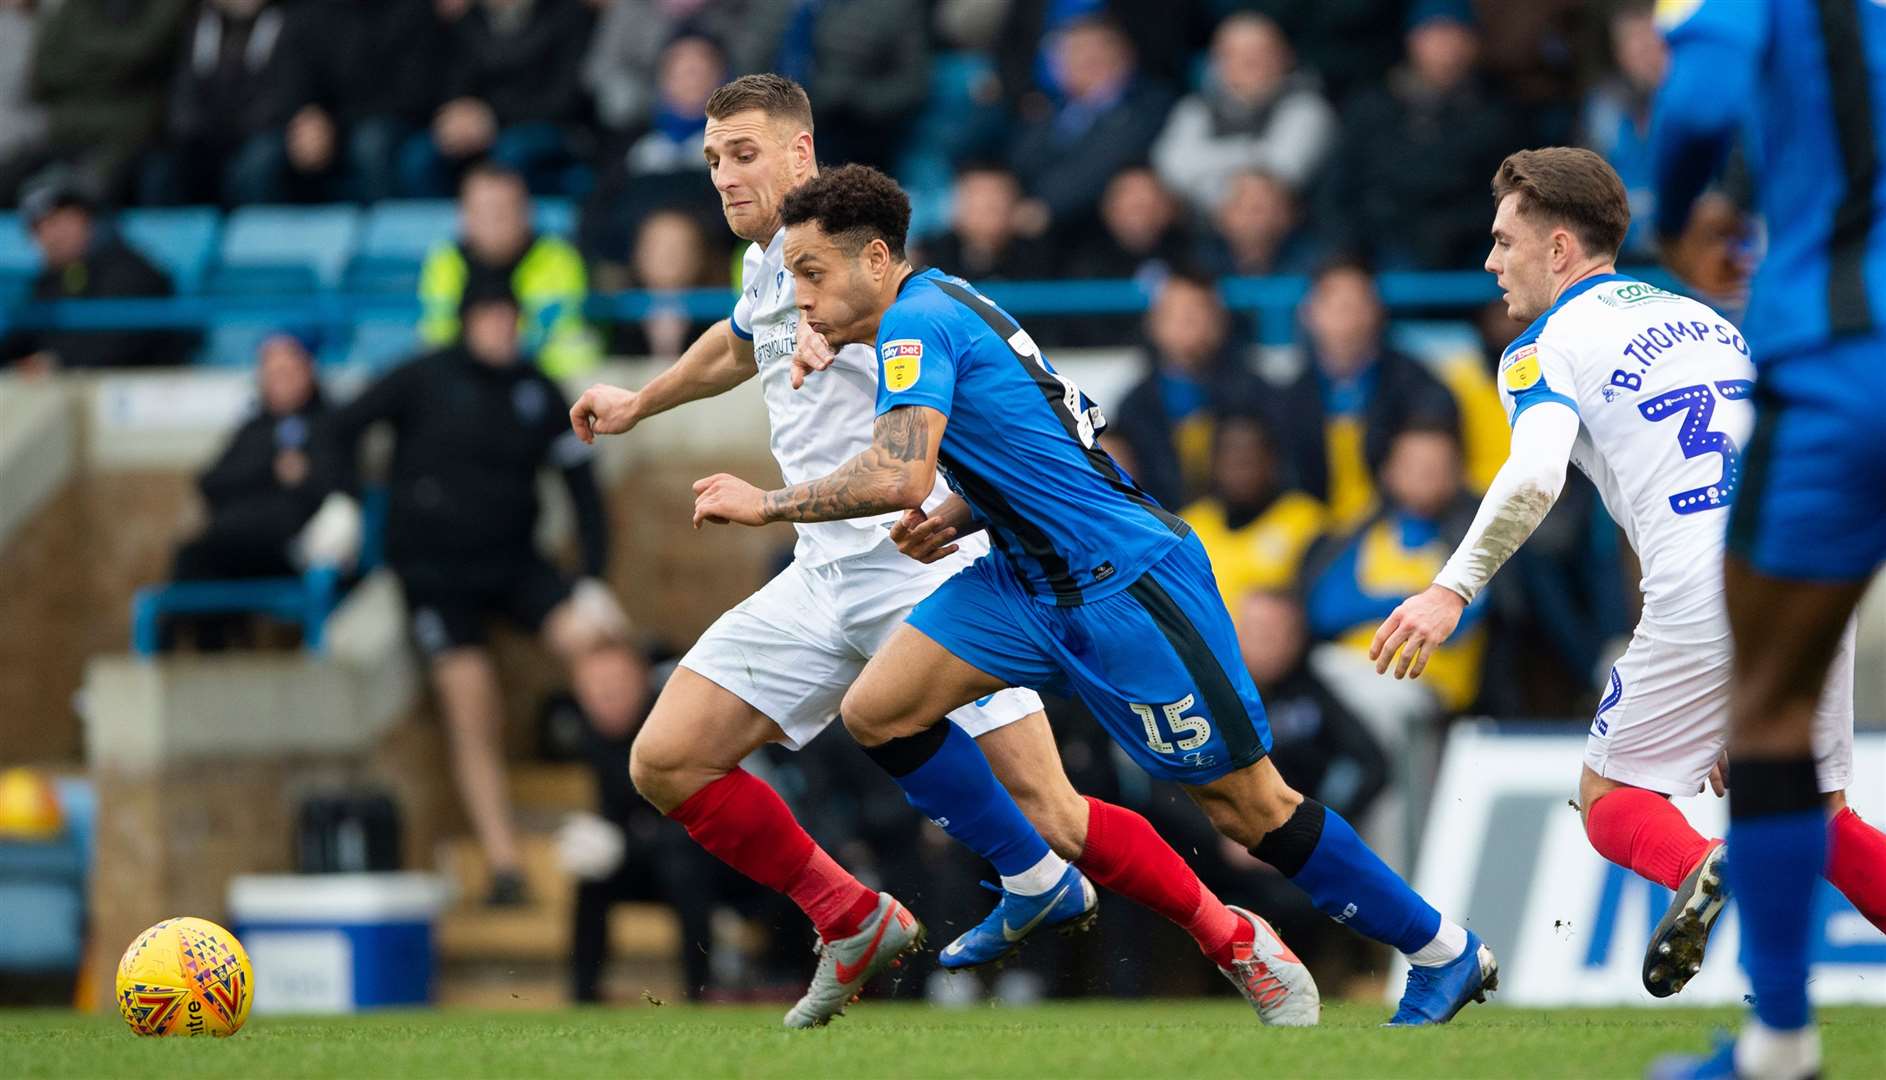 Ben Thompson (32) in action for Portsmouth against the Gills in 2018